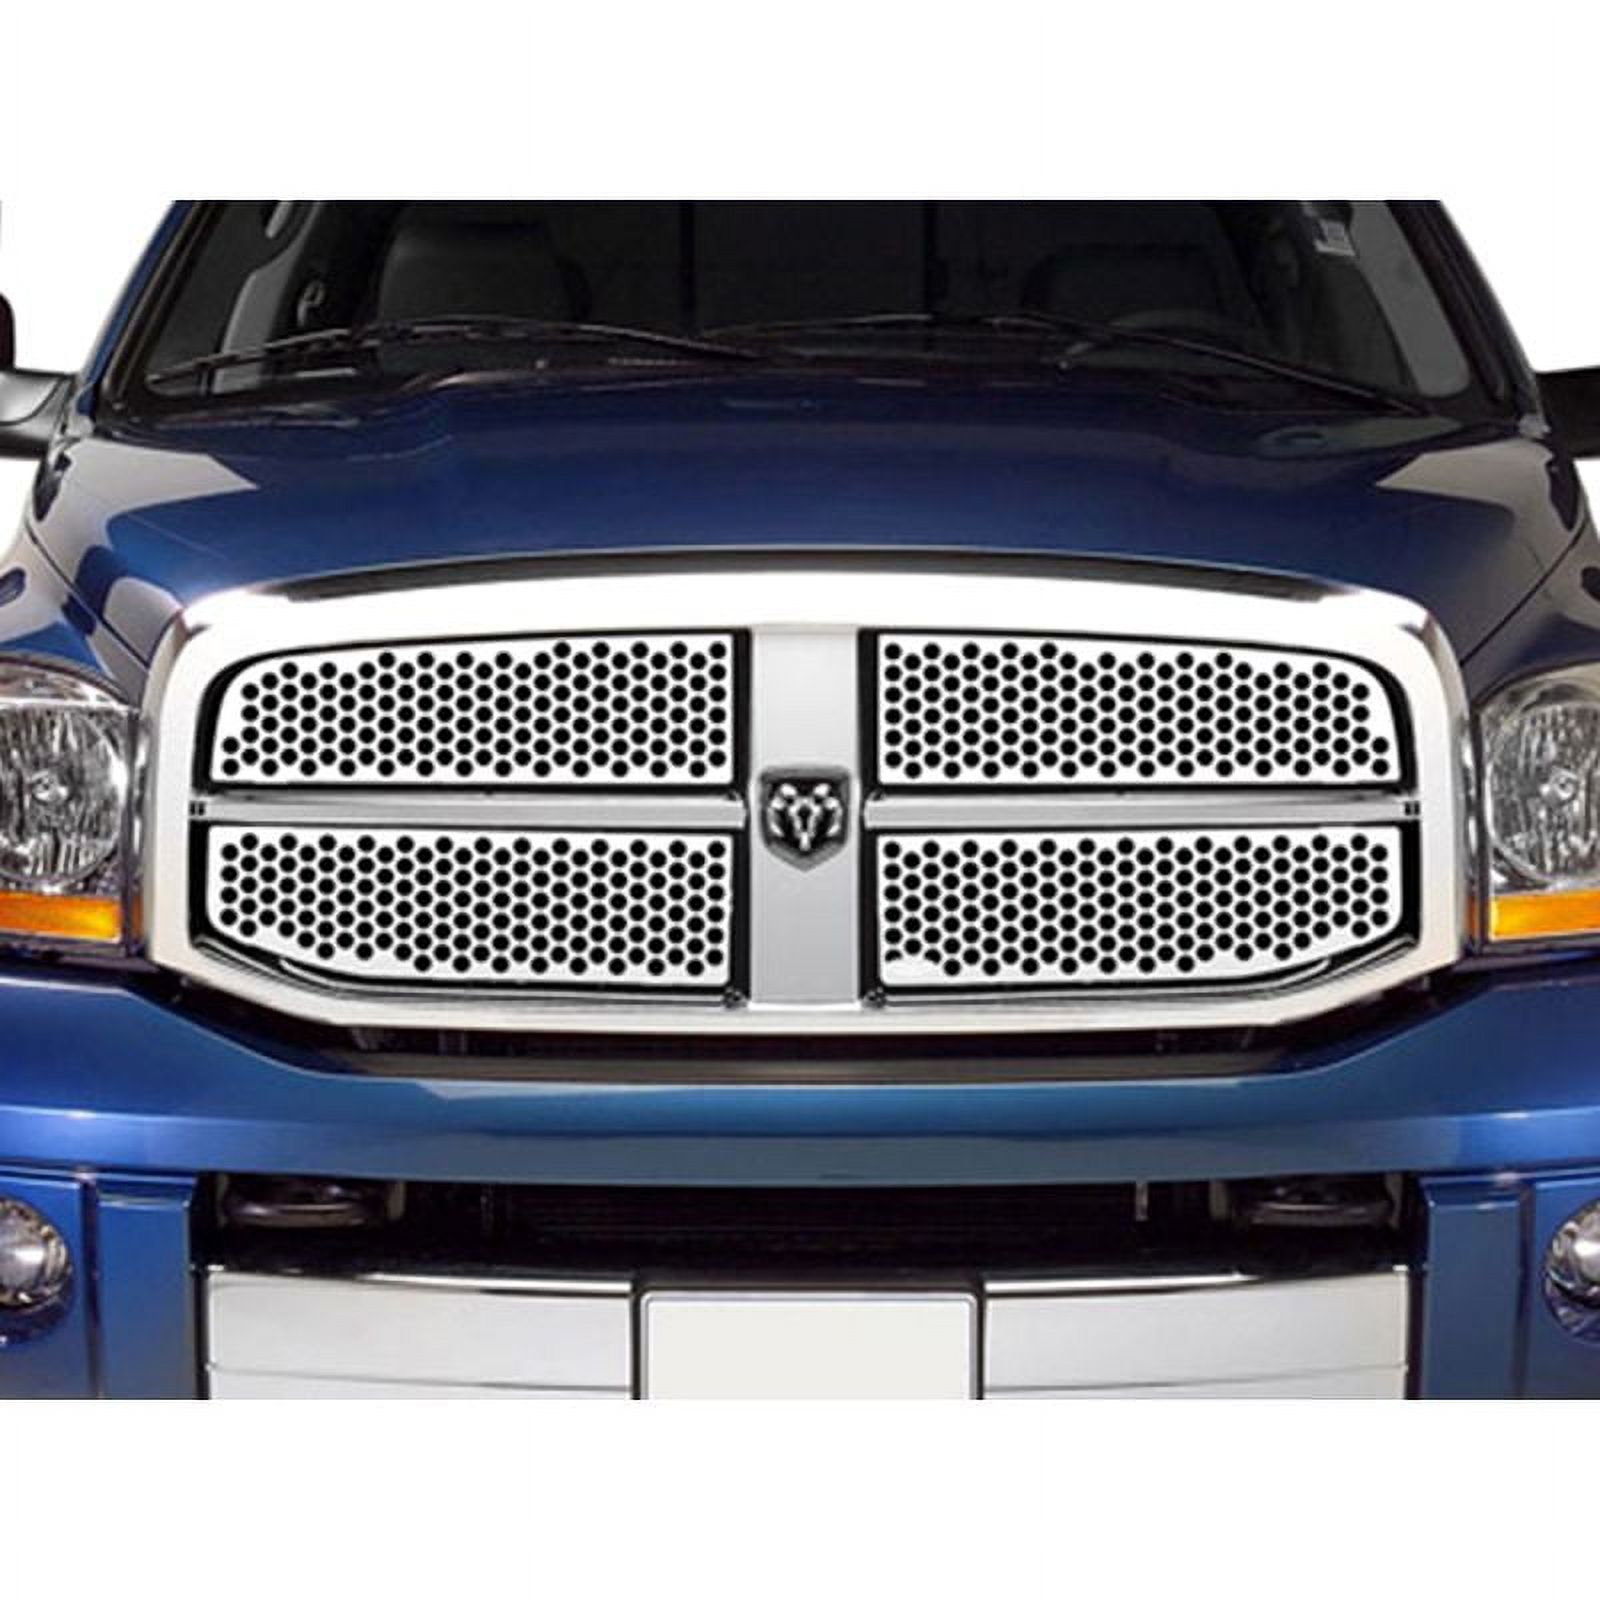 Putco 84203 Billet Grille, Stainless Steel Grille Insert - image 1 of 4